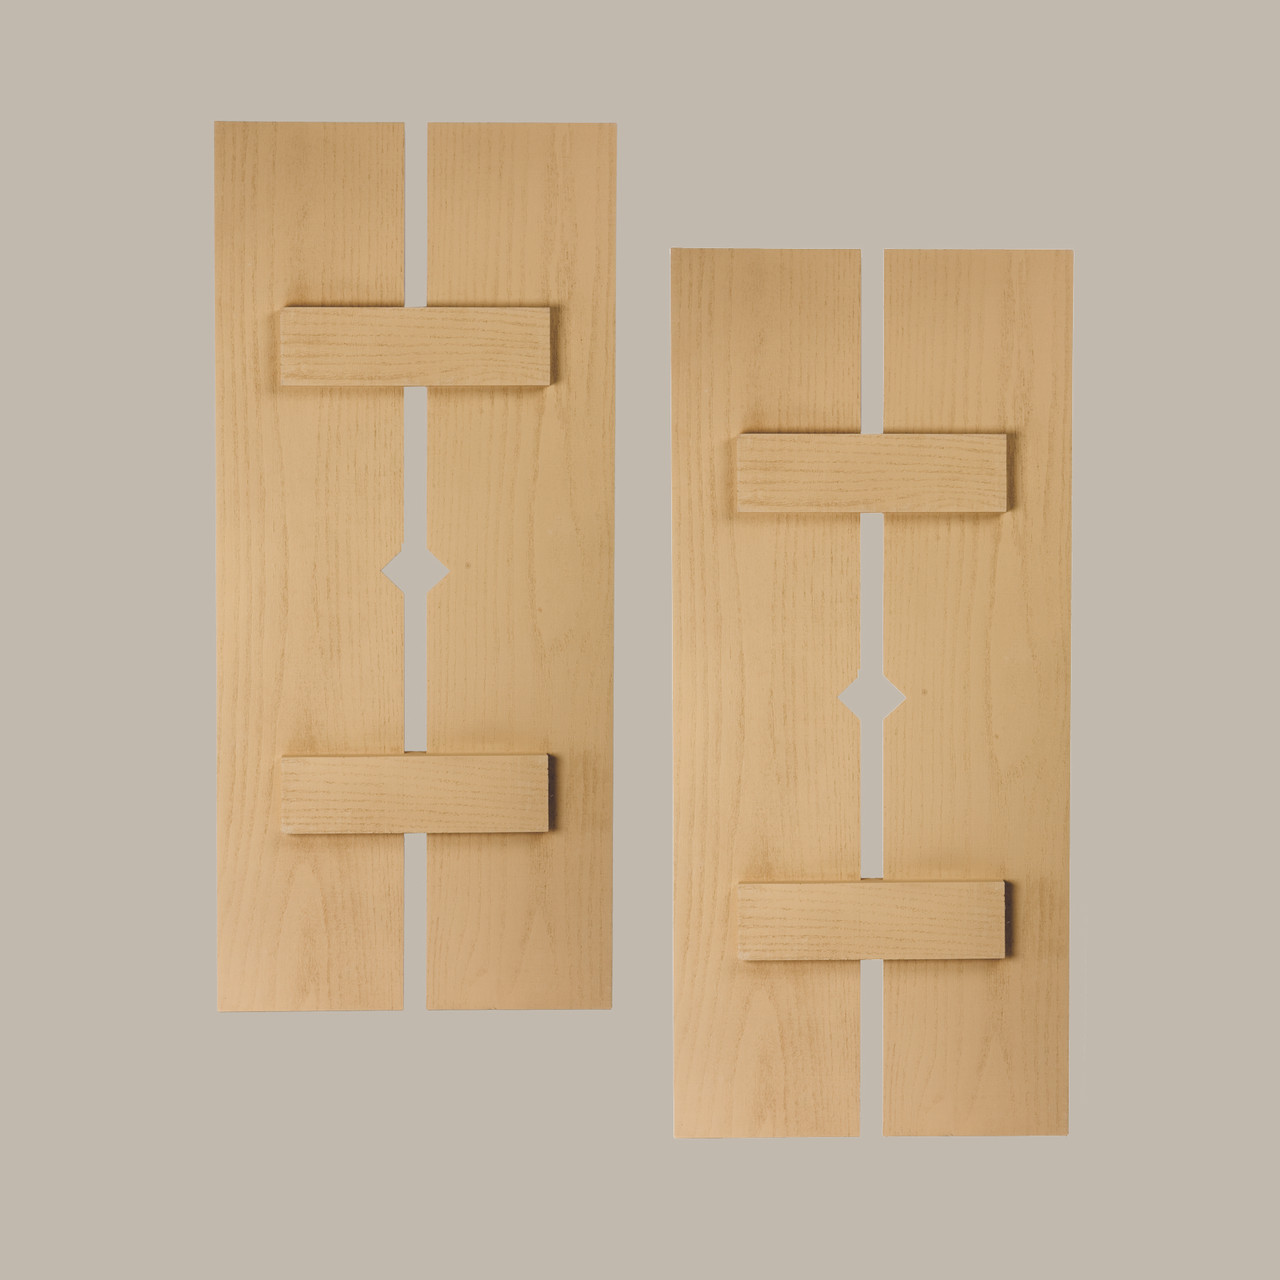 12 inch by 43 inch Plank Shutter with 2-Plank, Diamond